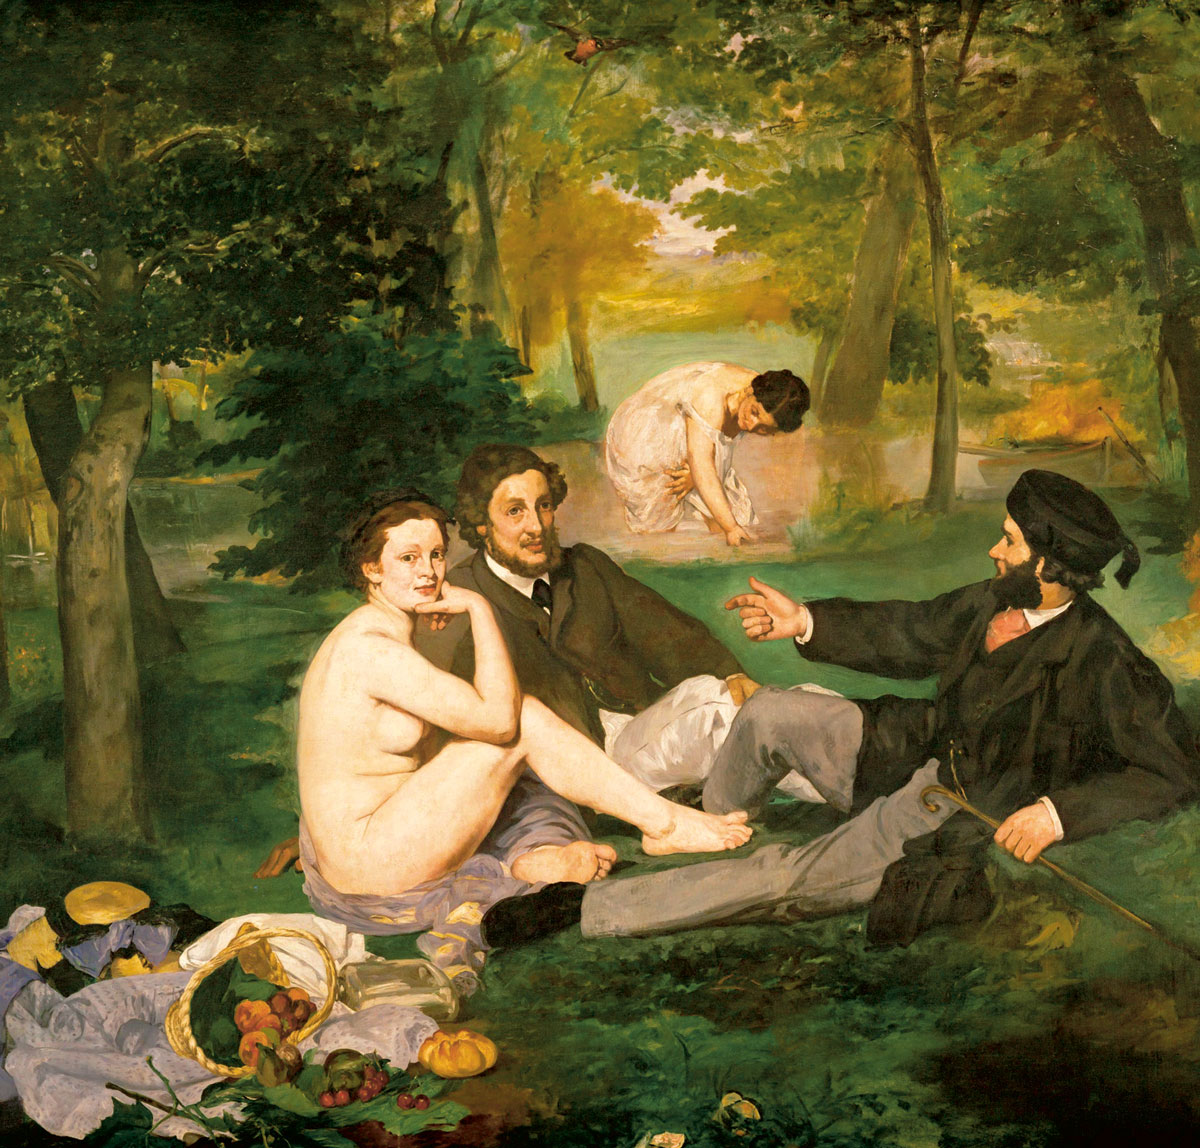 Edouard Manet’s eighteen sixty-three painting titled “Le Déjeuner sur l’herbe.”